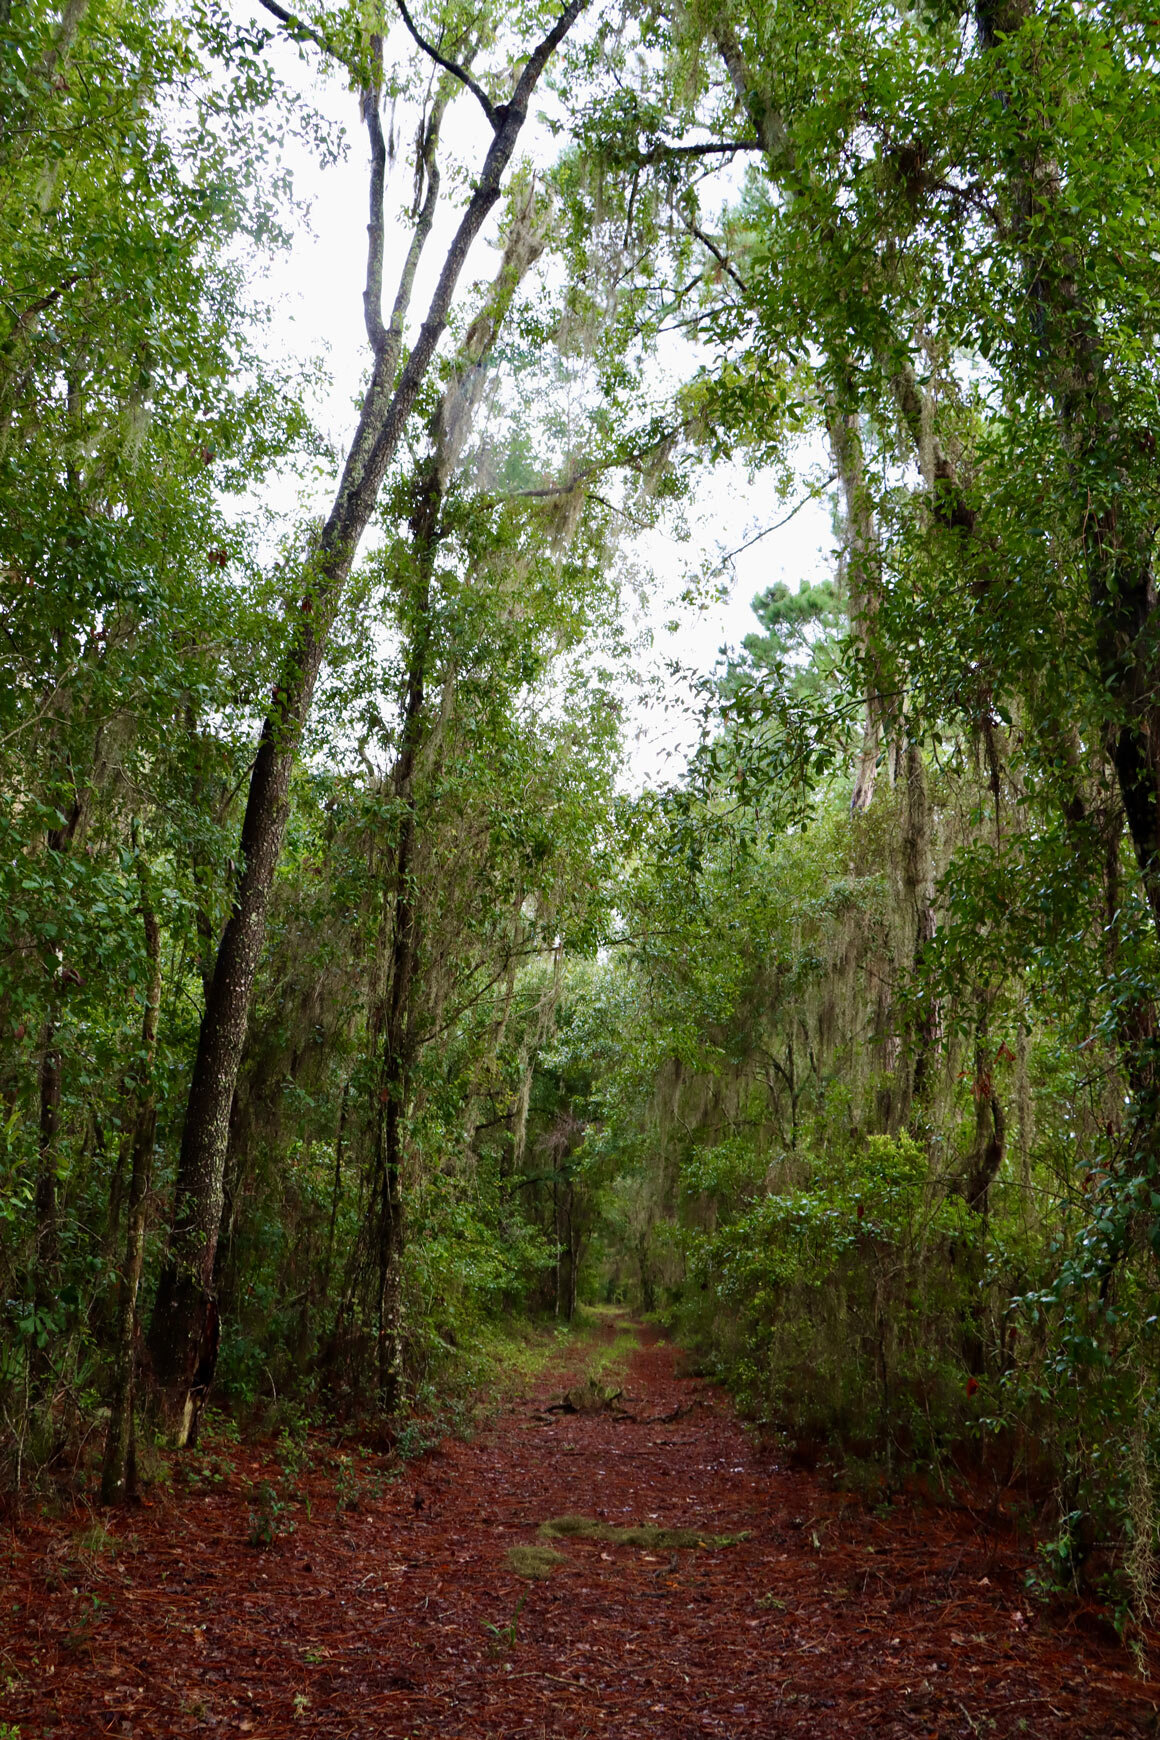  Price’s Scrub State Park has a variety of habitats including this hardwood forest  (View of the forested trail with oaks and Spanish moss draped on the limbs) 